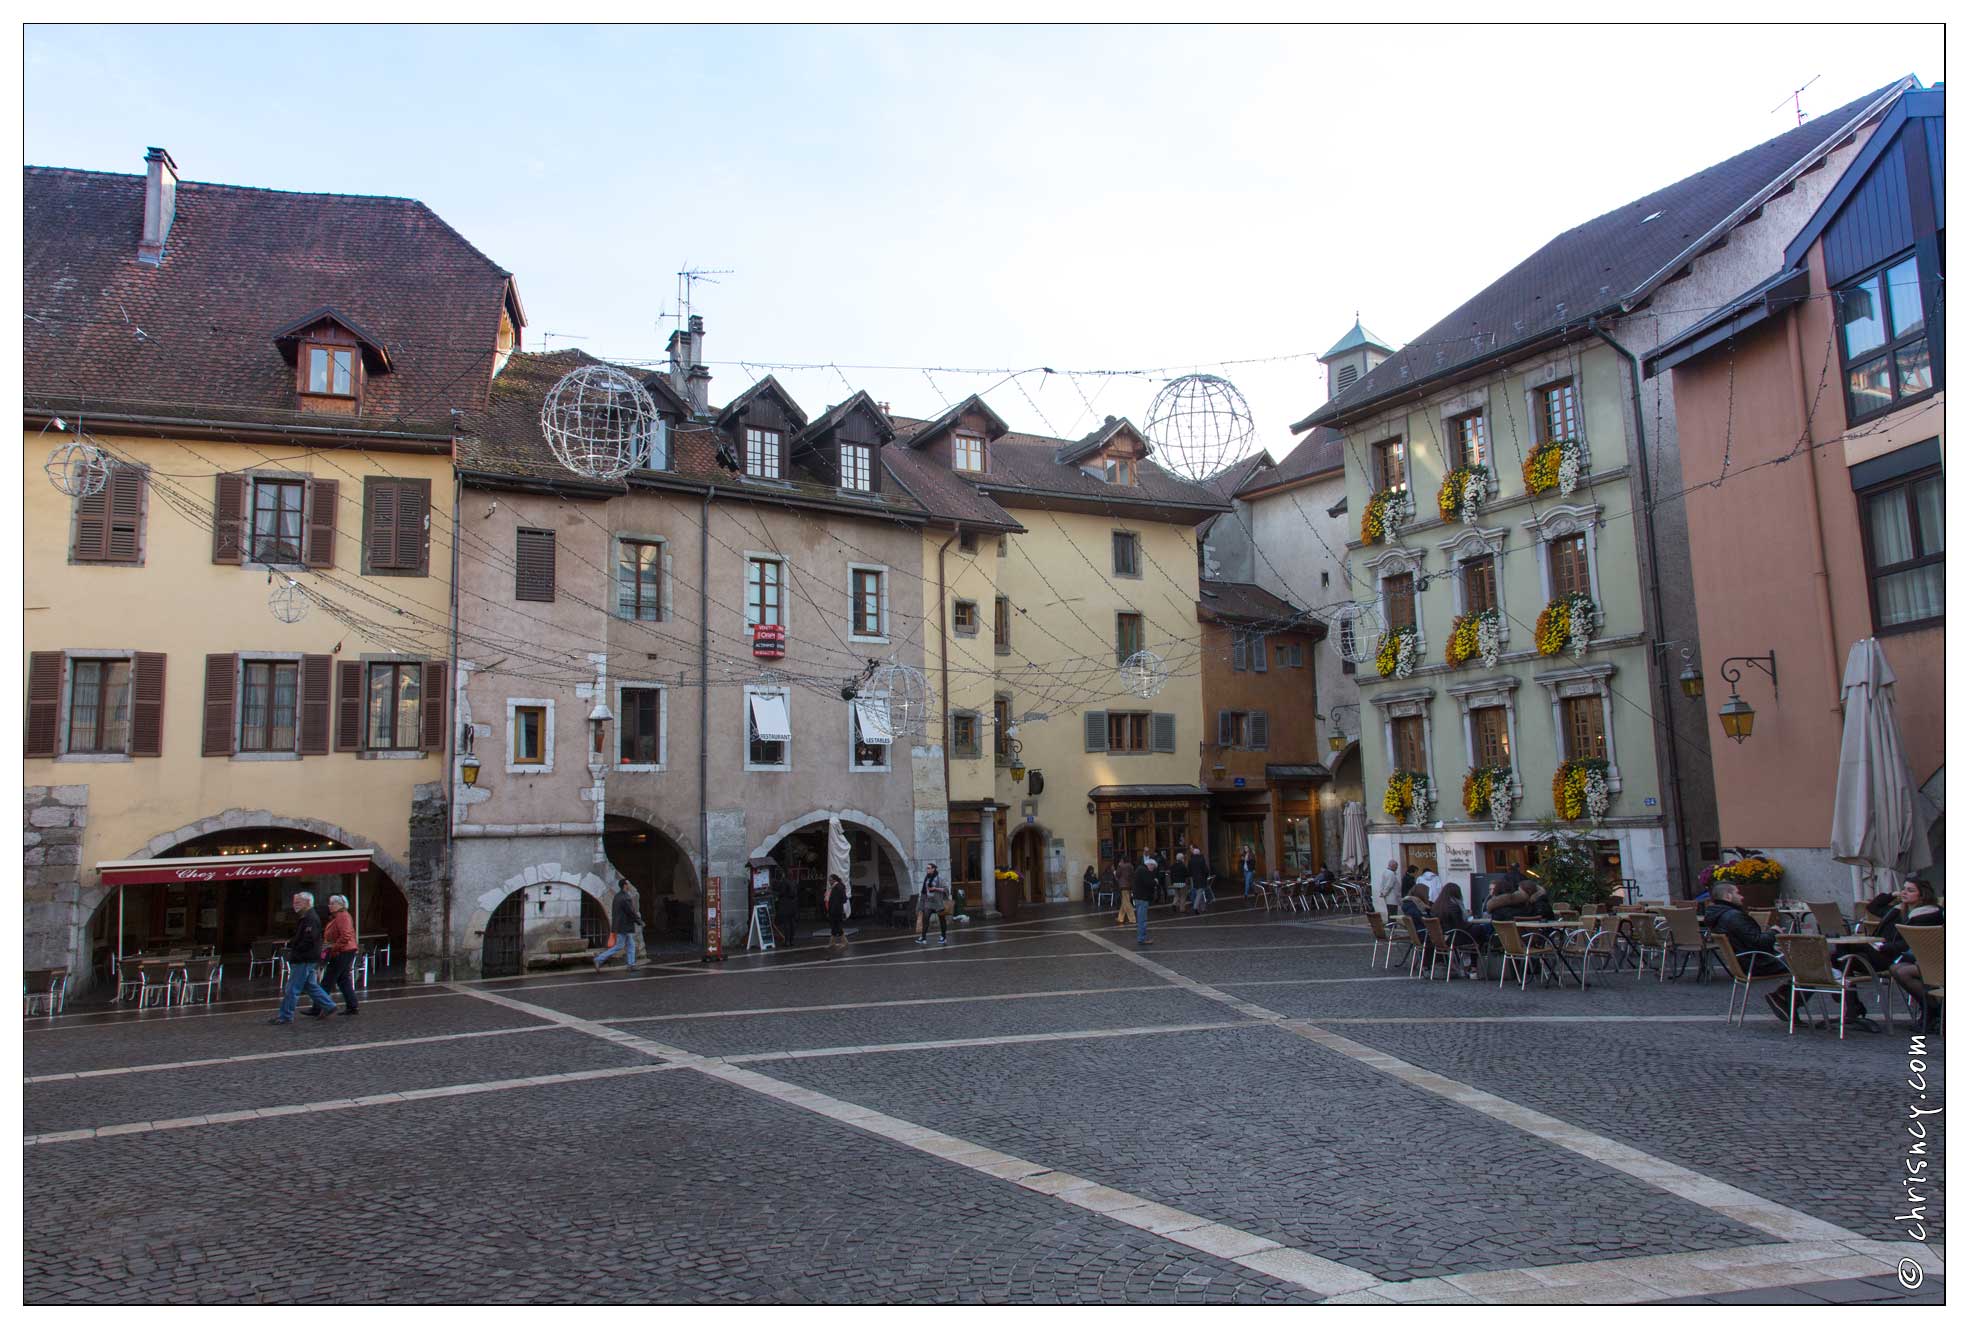 20151113-60_4719-Annecy_Place_Georges_Volland.jpg